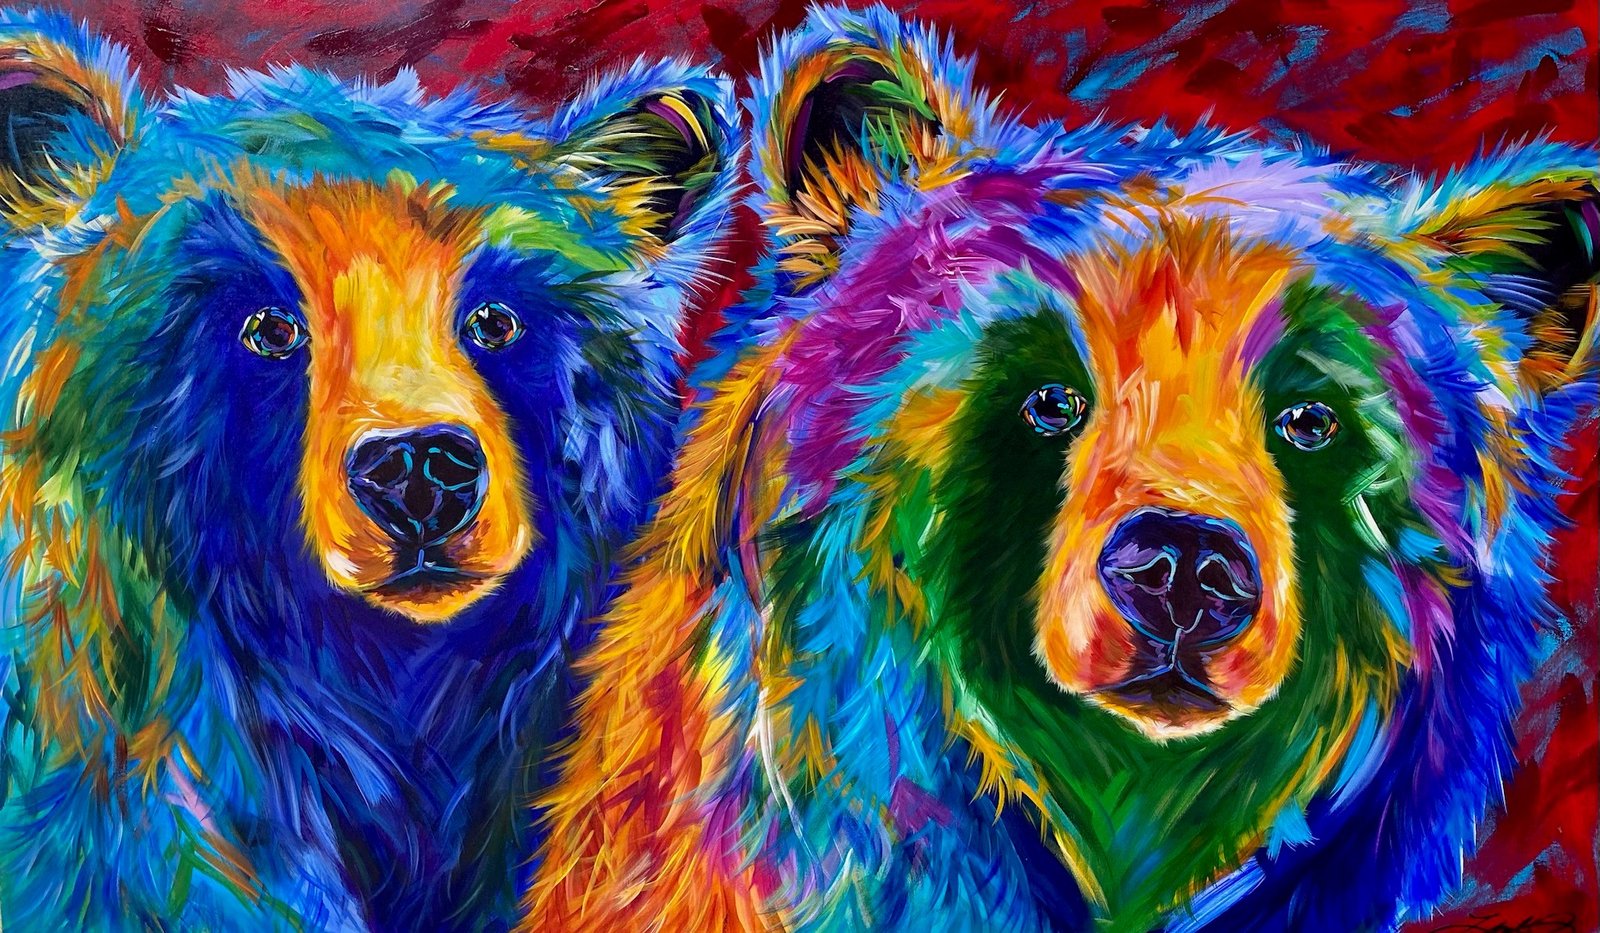 A vividly colorful painting of two bears